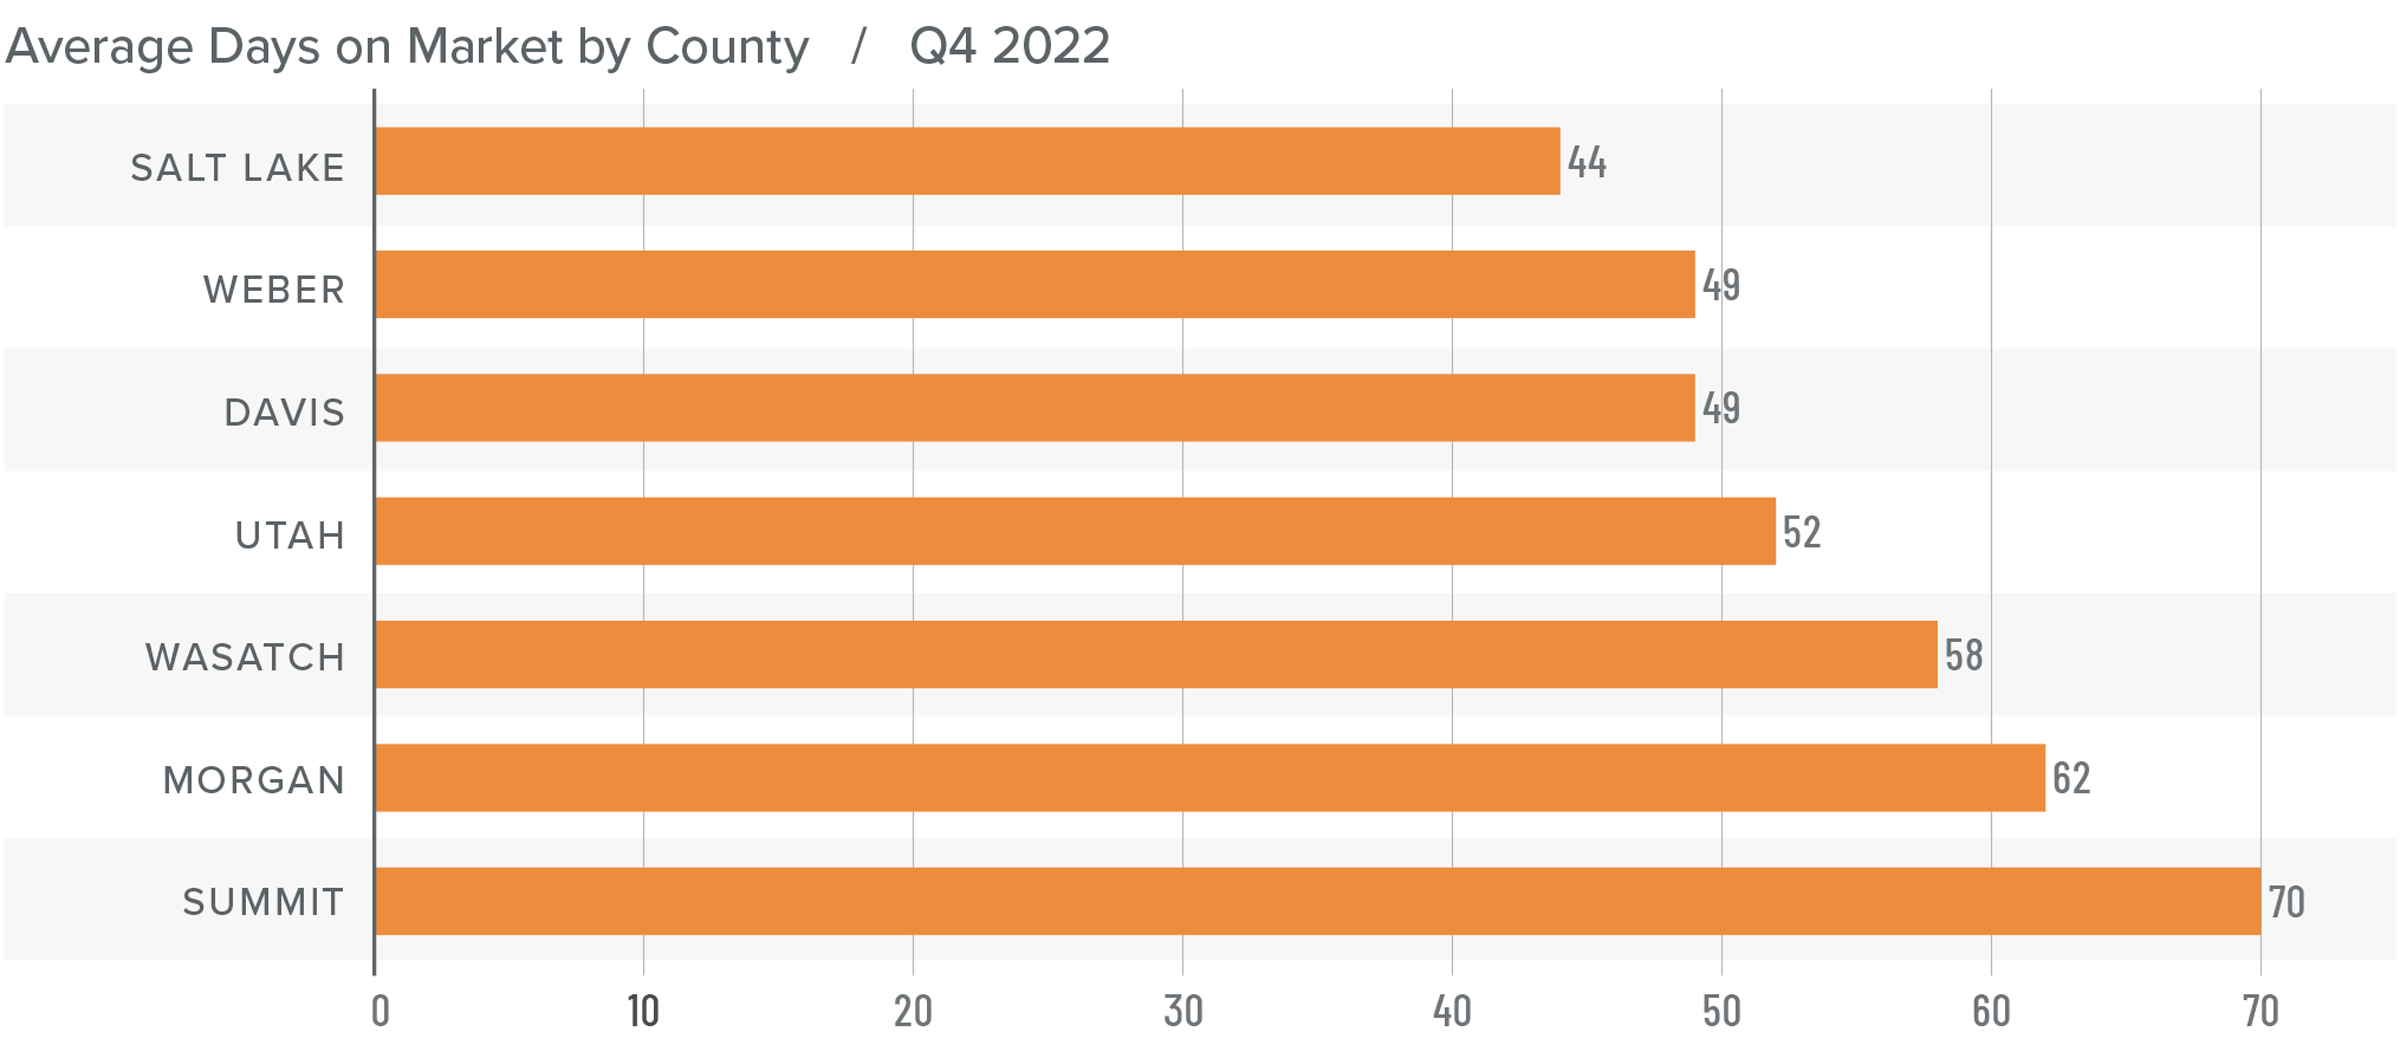 A bar graph showing the average days on market for homes in various counties in Utah for Q4 2022. Salt Lake County has the lowest DOM at 44, followed by Weber and Davis at 49, Utah at 52, Wasatch at 58, Morgan at 62, and Summit at 70.